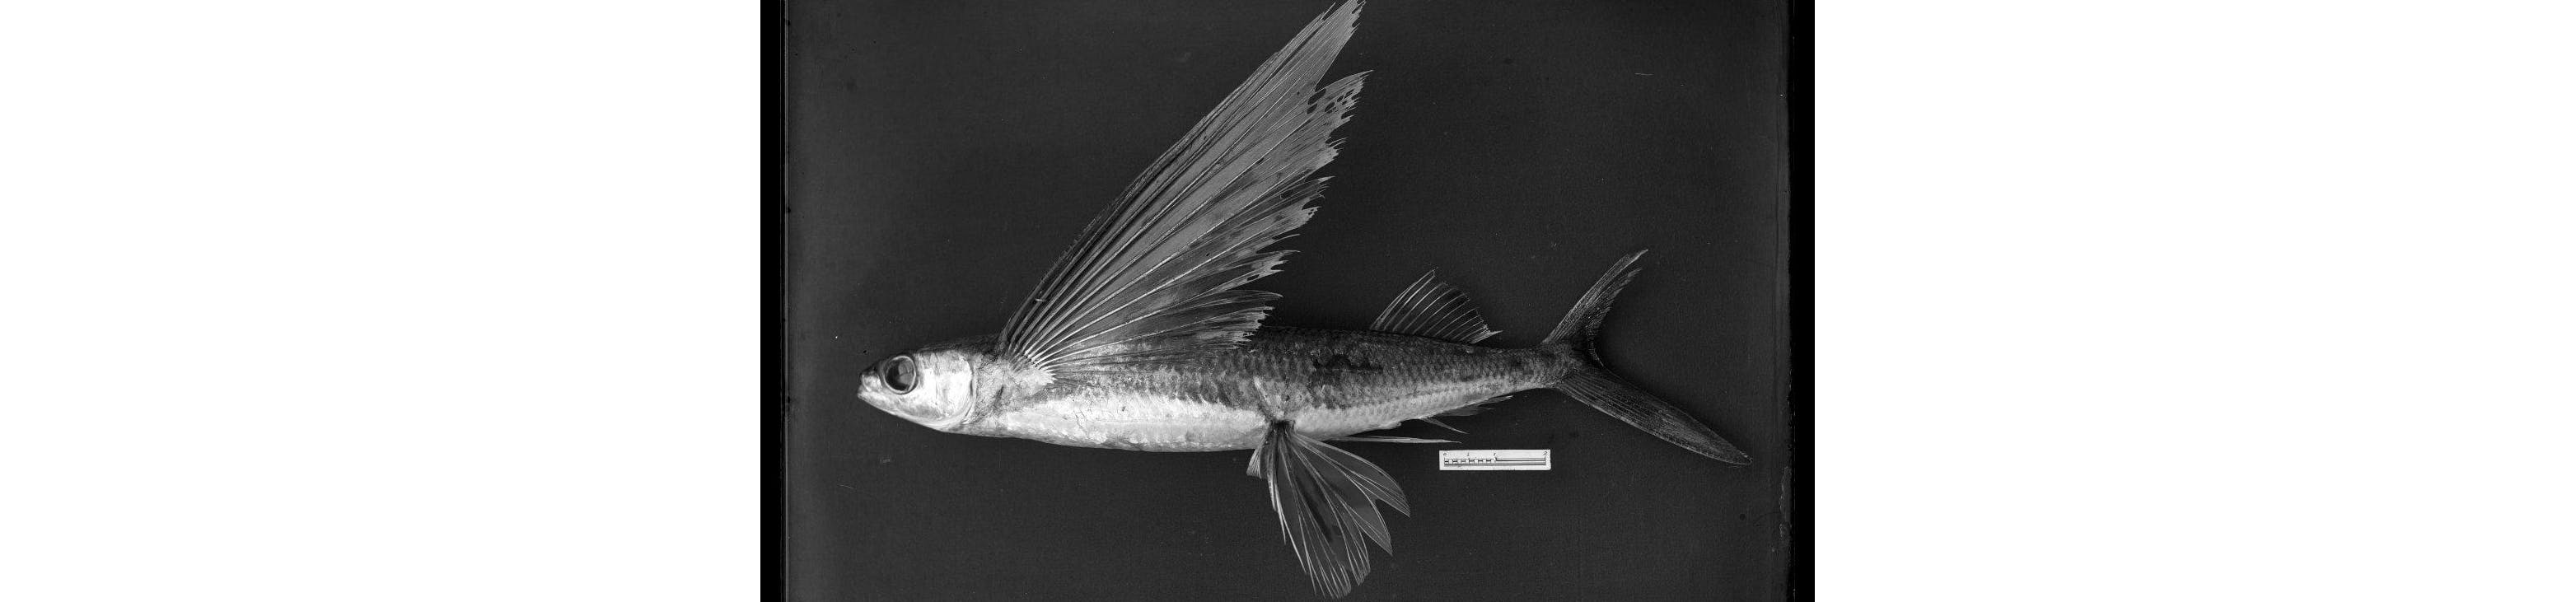 Black and white image of Tailfin flying fish 